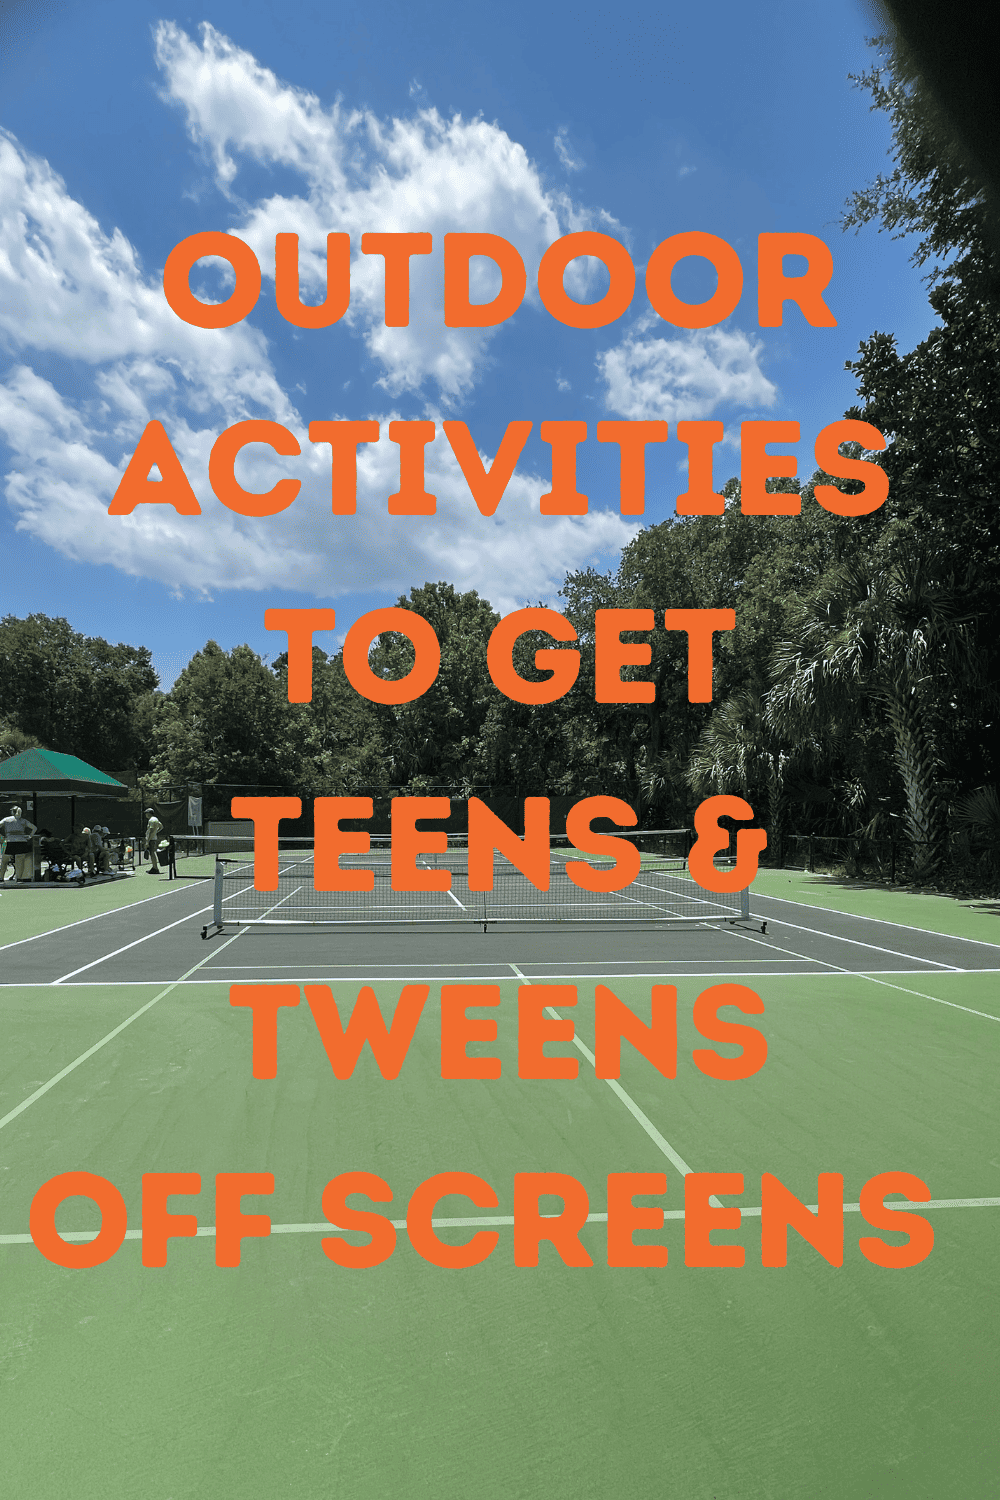 outdoor games and activities for teens and tweens to get them off screens